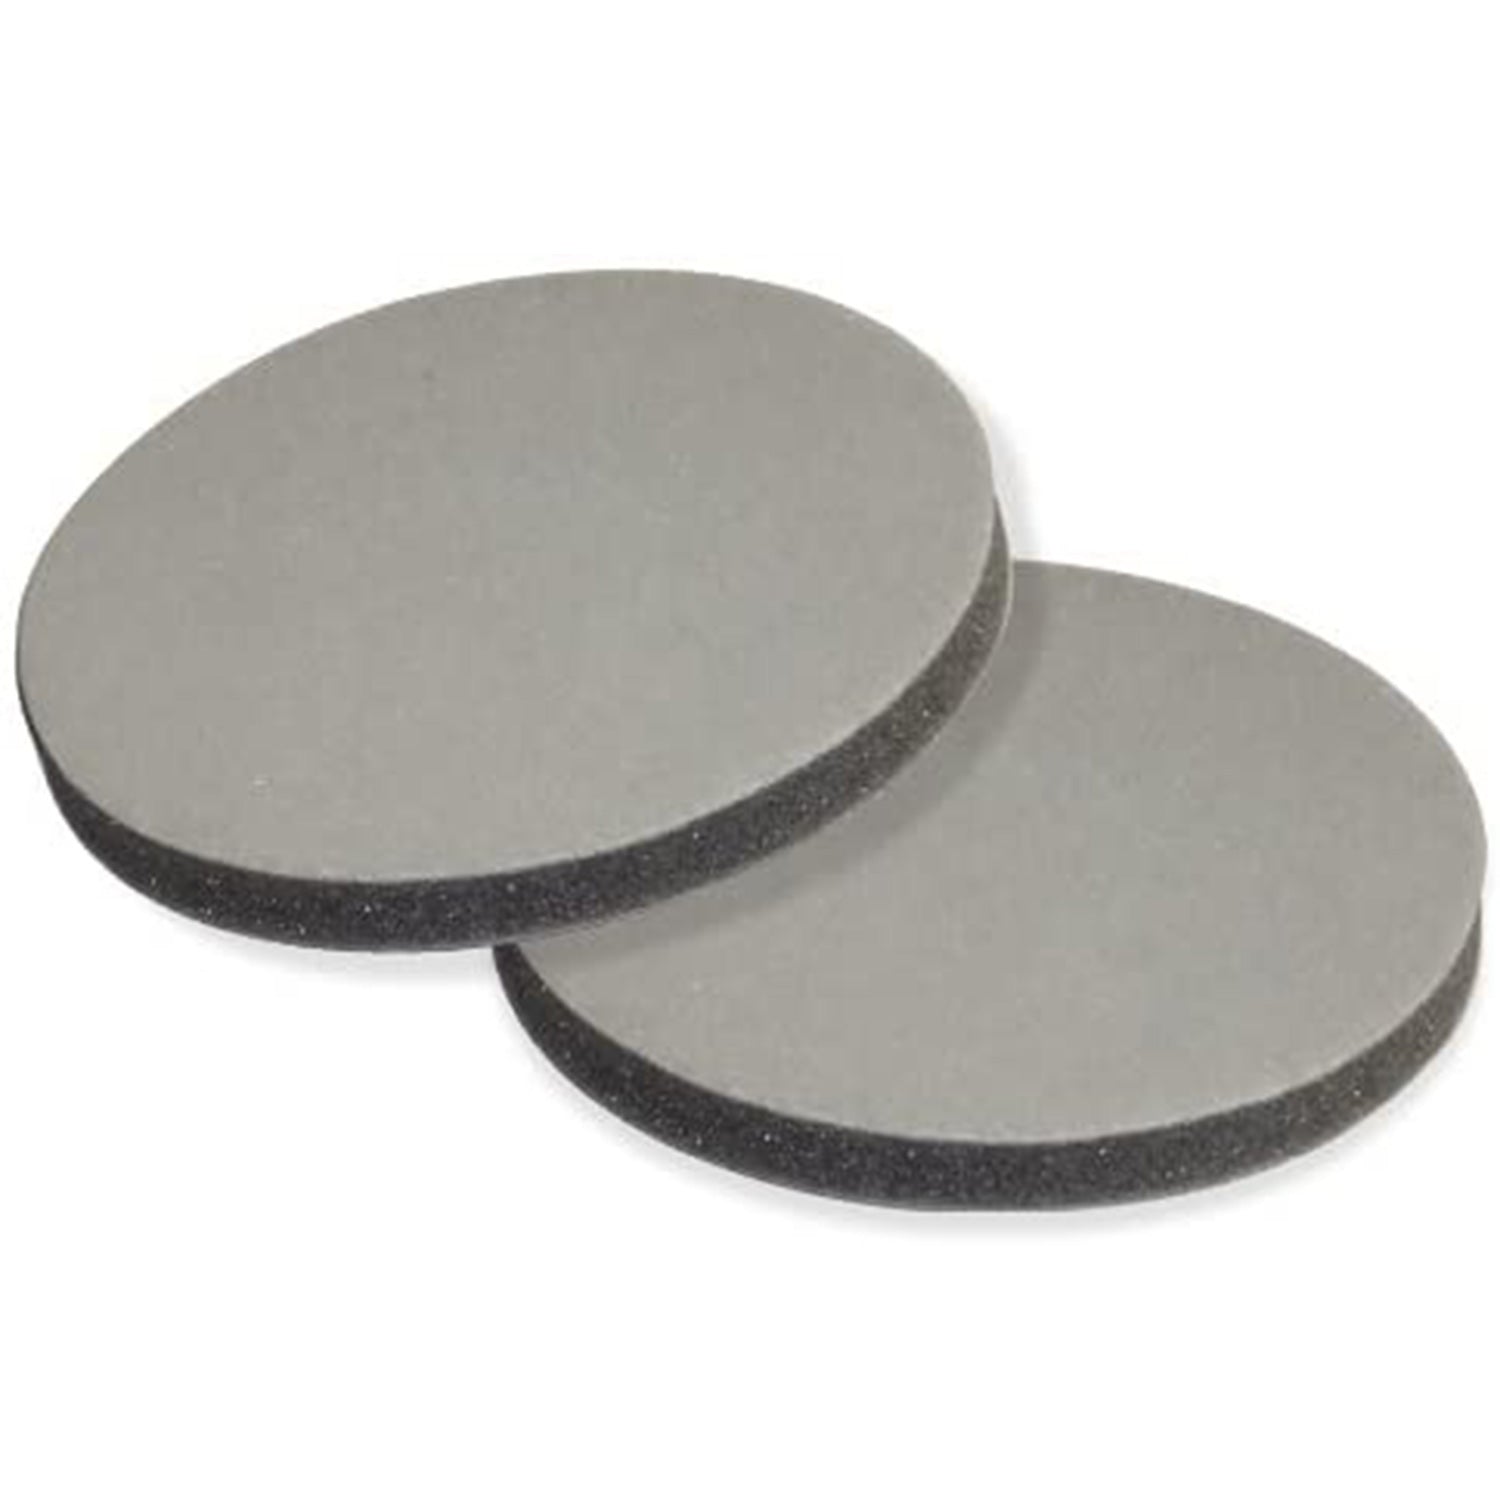 eagle-sandpaper-3-inch-interface-pads